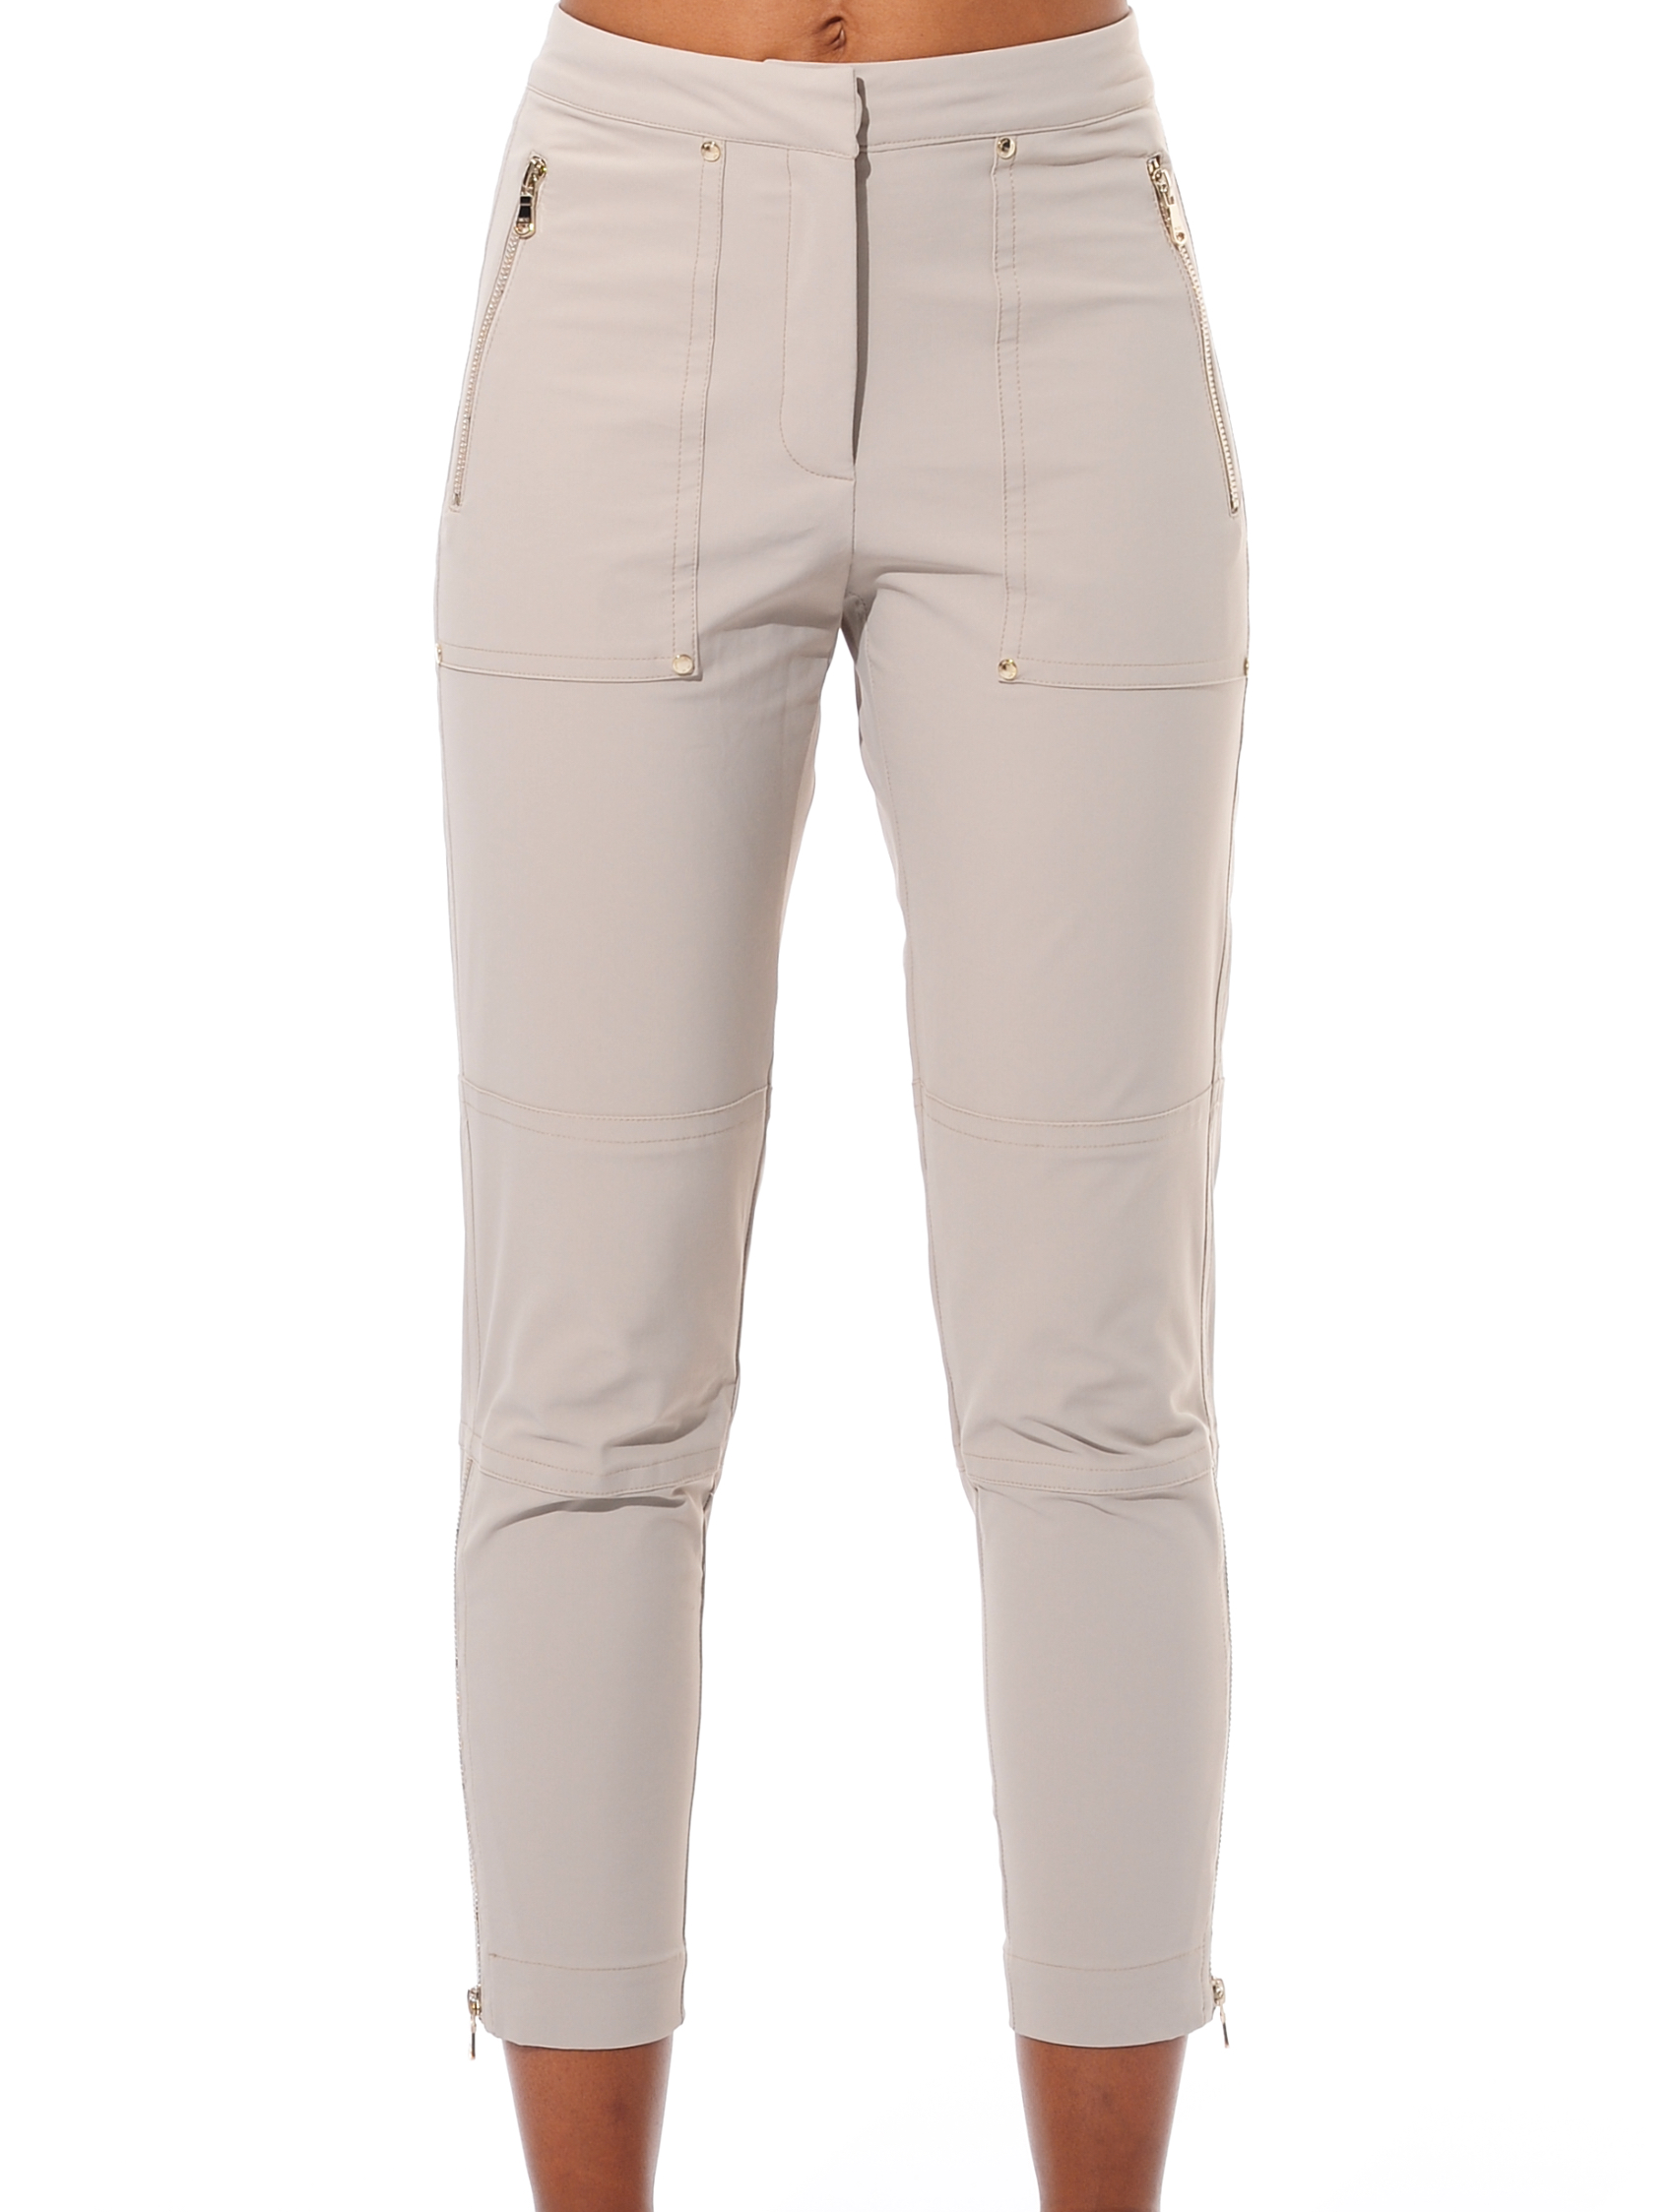 4way Stretch Slim Fit Cargo Pants light taupe